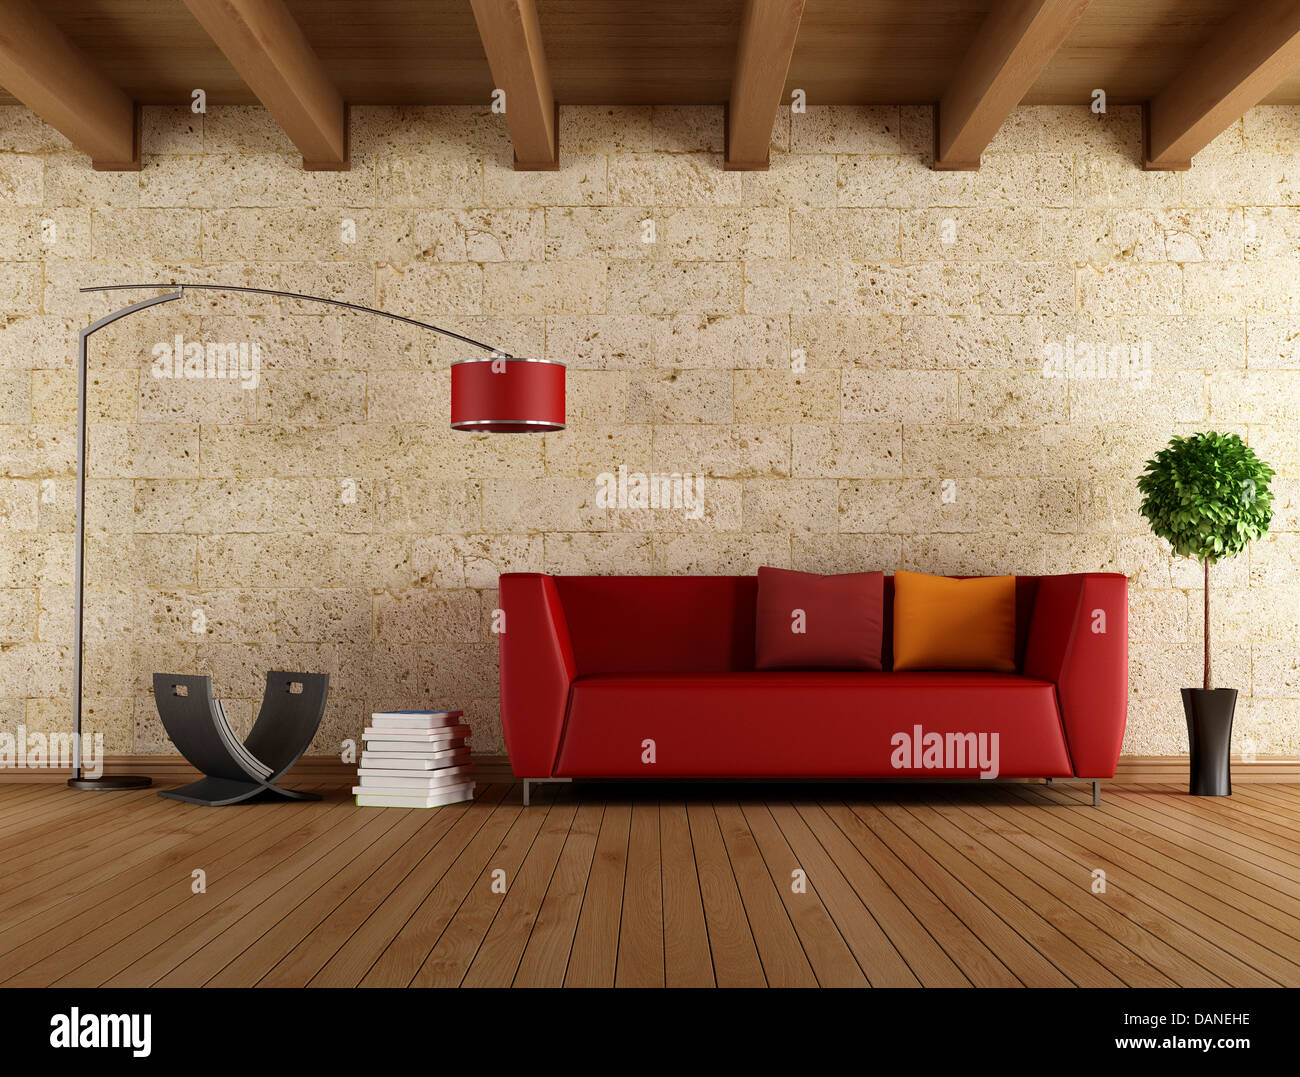 Modern Red Sofa In A Old Room Rendering Stock Photo 58250122